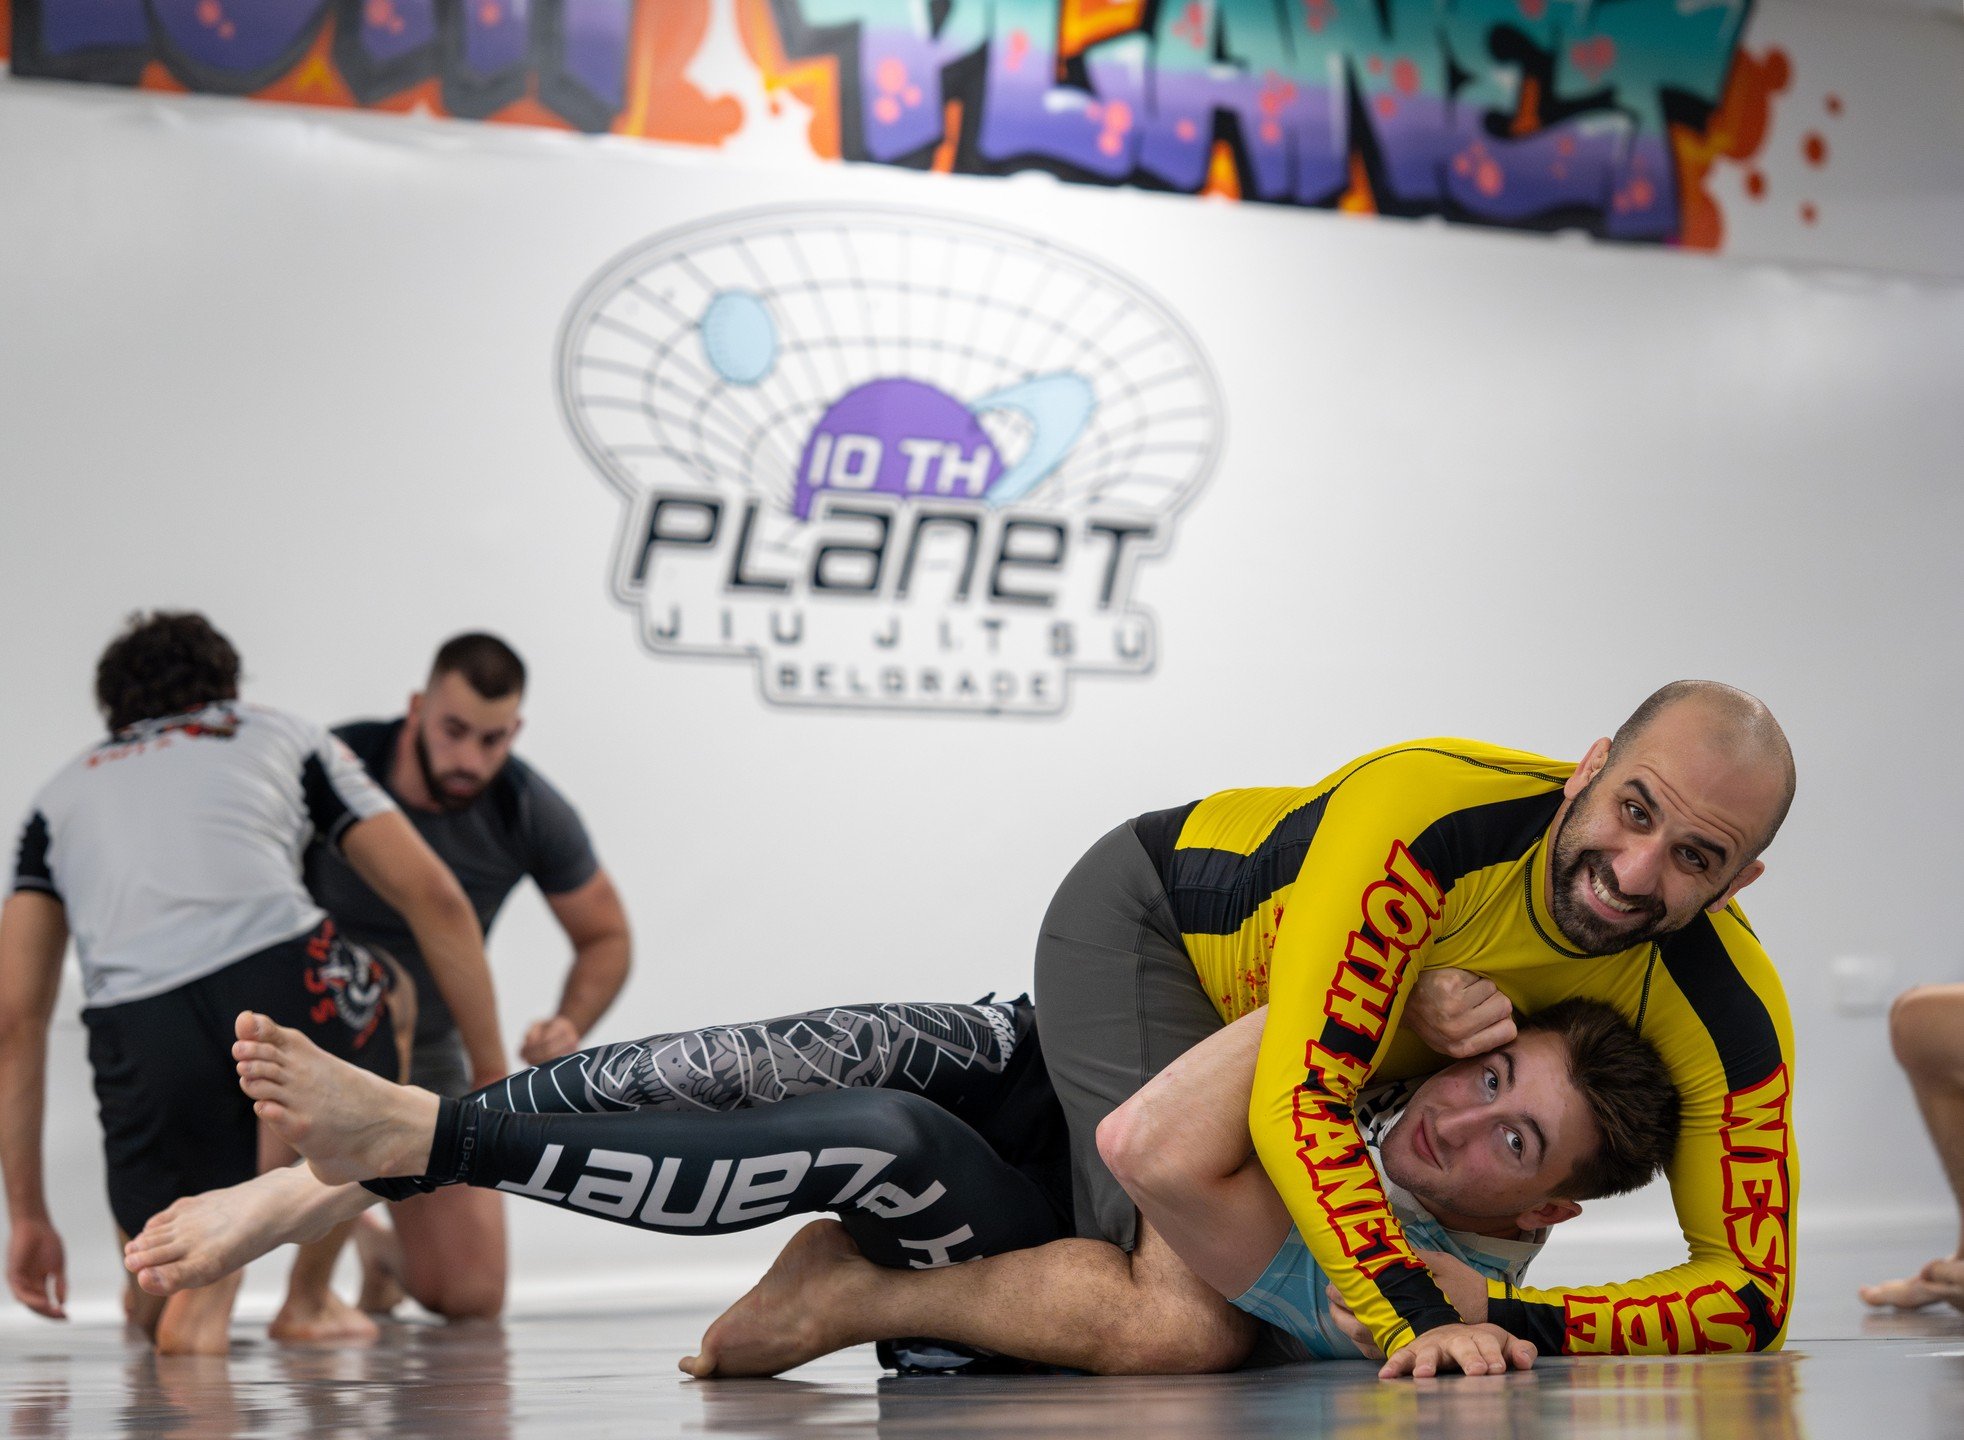 Happy is as happy does! 🤗

@dr_armanhammer_10p enjoying every second on the mats. 🖤

#enjoythejourney #worldwide #family #10thplanetjiujitsu